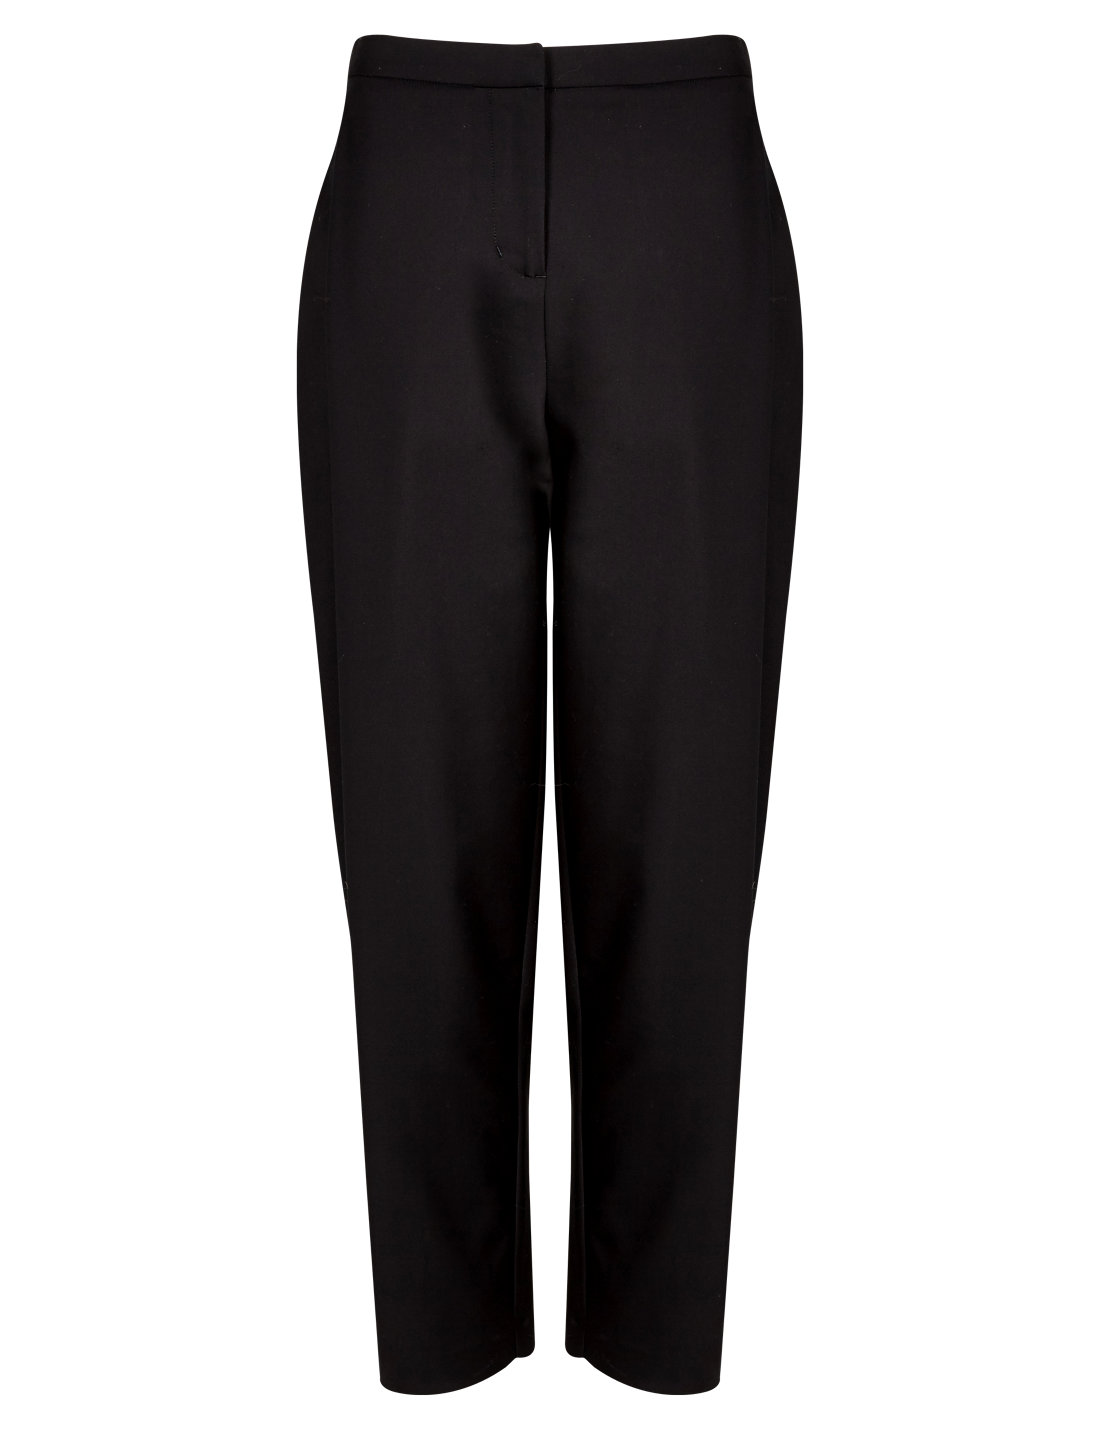 Marks and Spencer - - M&5 ASSORTED Ladies Trousers - Size 8 to 16